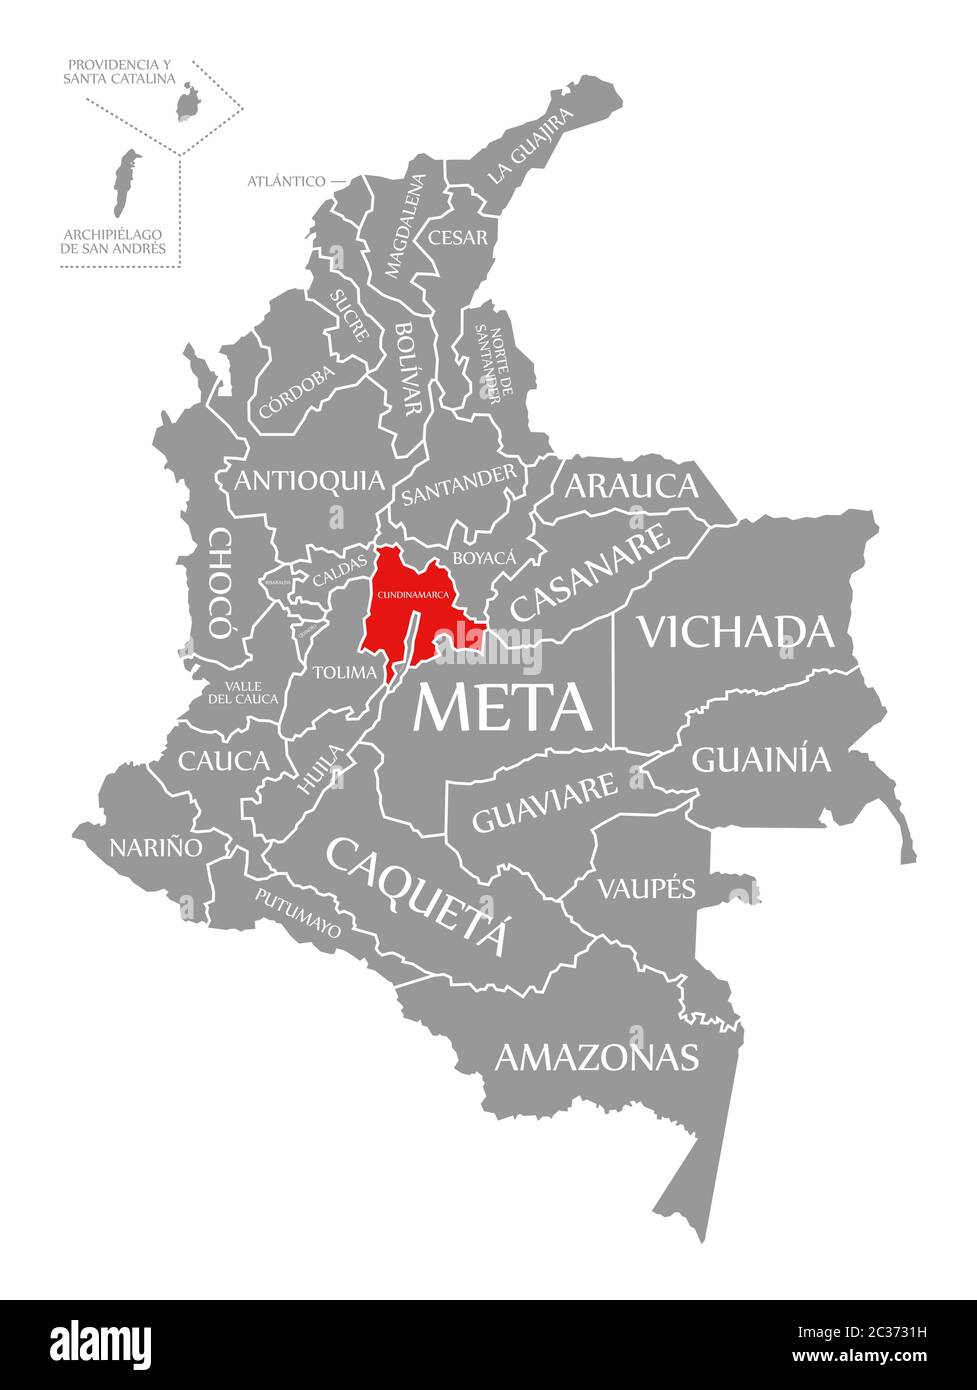 Cundinamarca red highlighted in map of Colombia Stock Photo